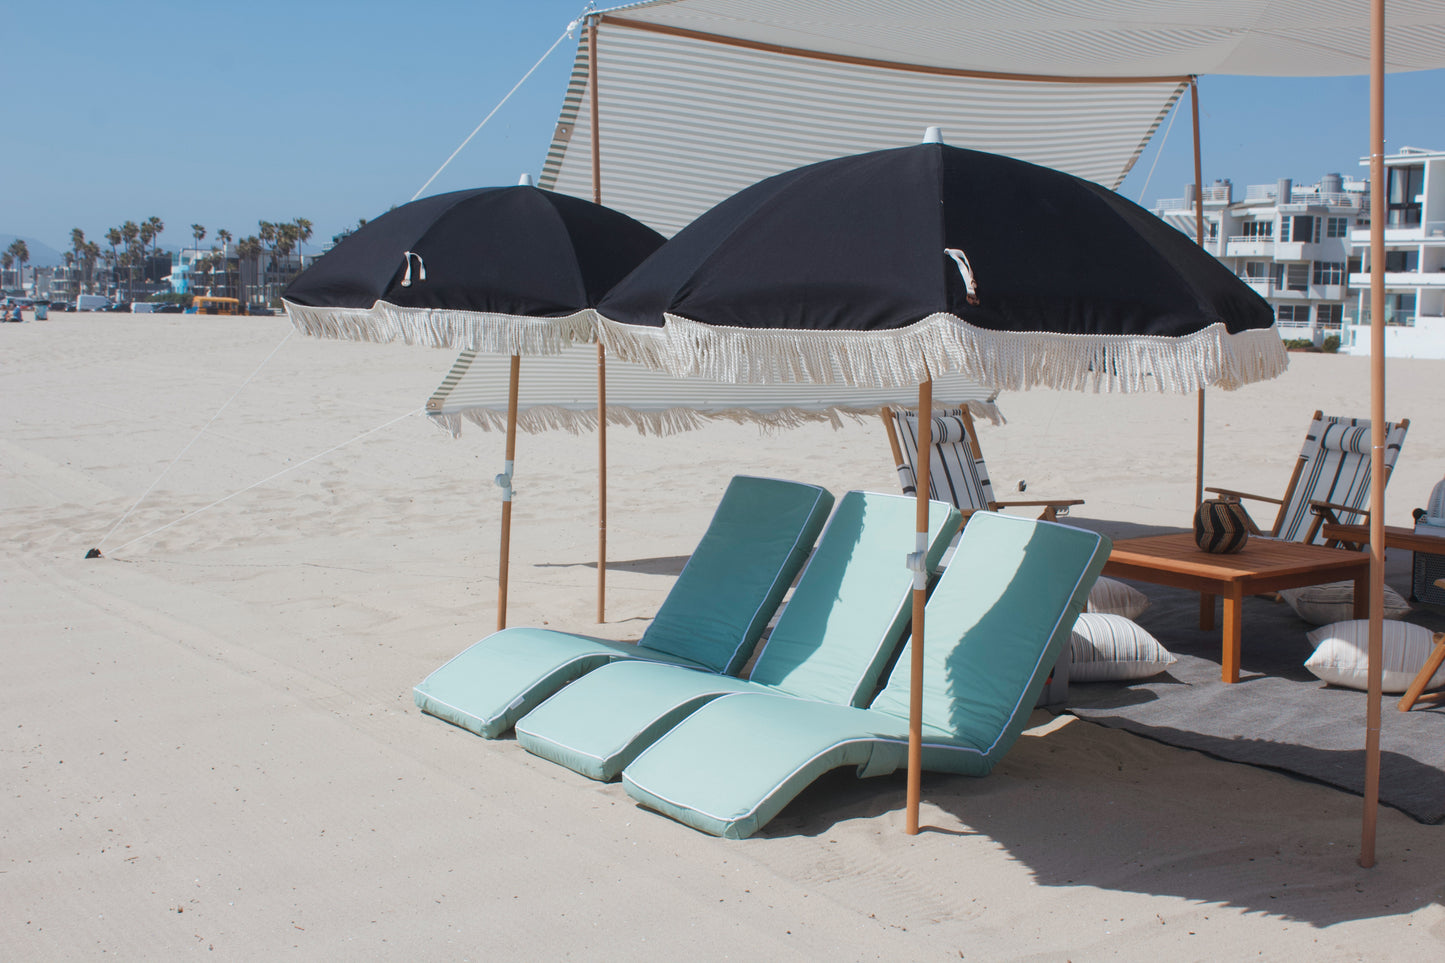 Beach lounge rental with beach lounges, umbrellas and beach chairs on Los Angeles beach